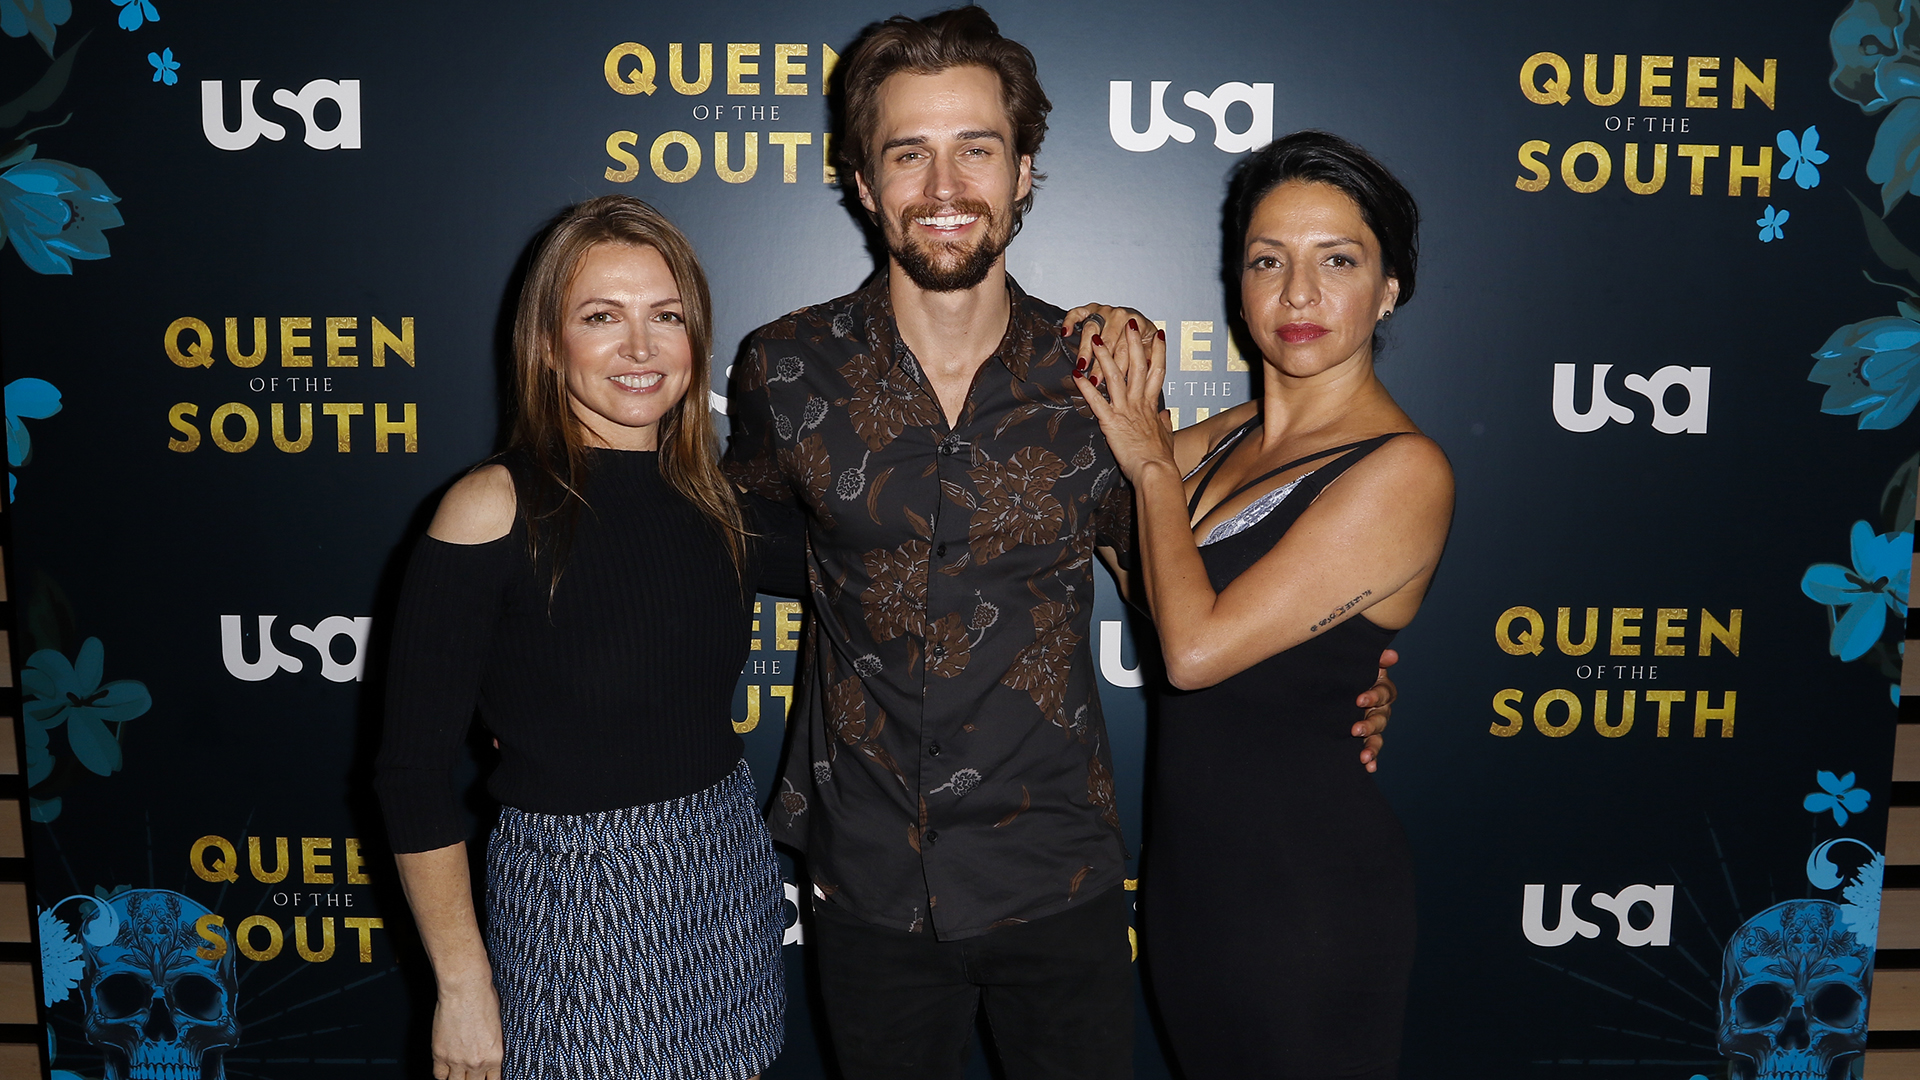 Queen of the South at Hispanicize 2017. Photo Galleries